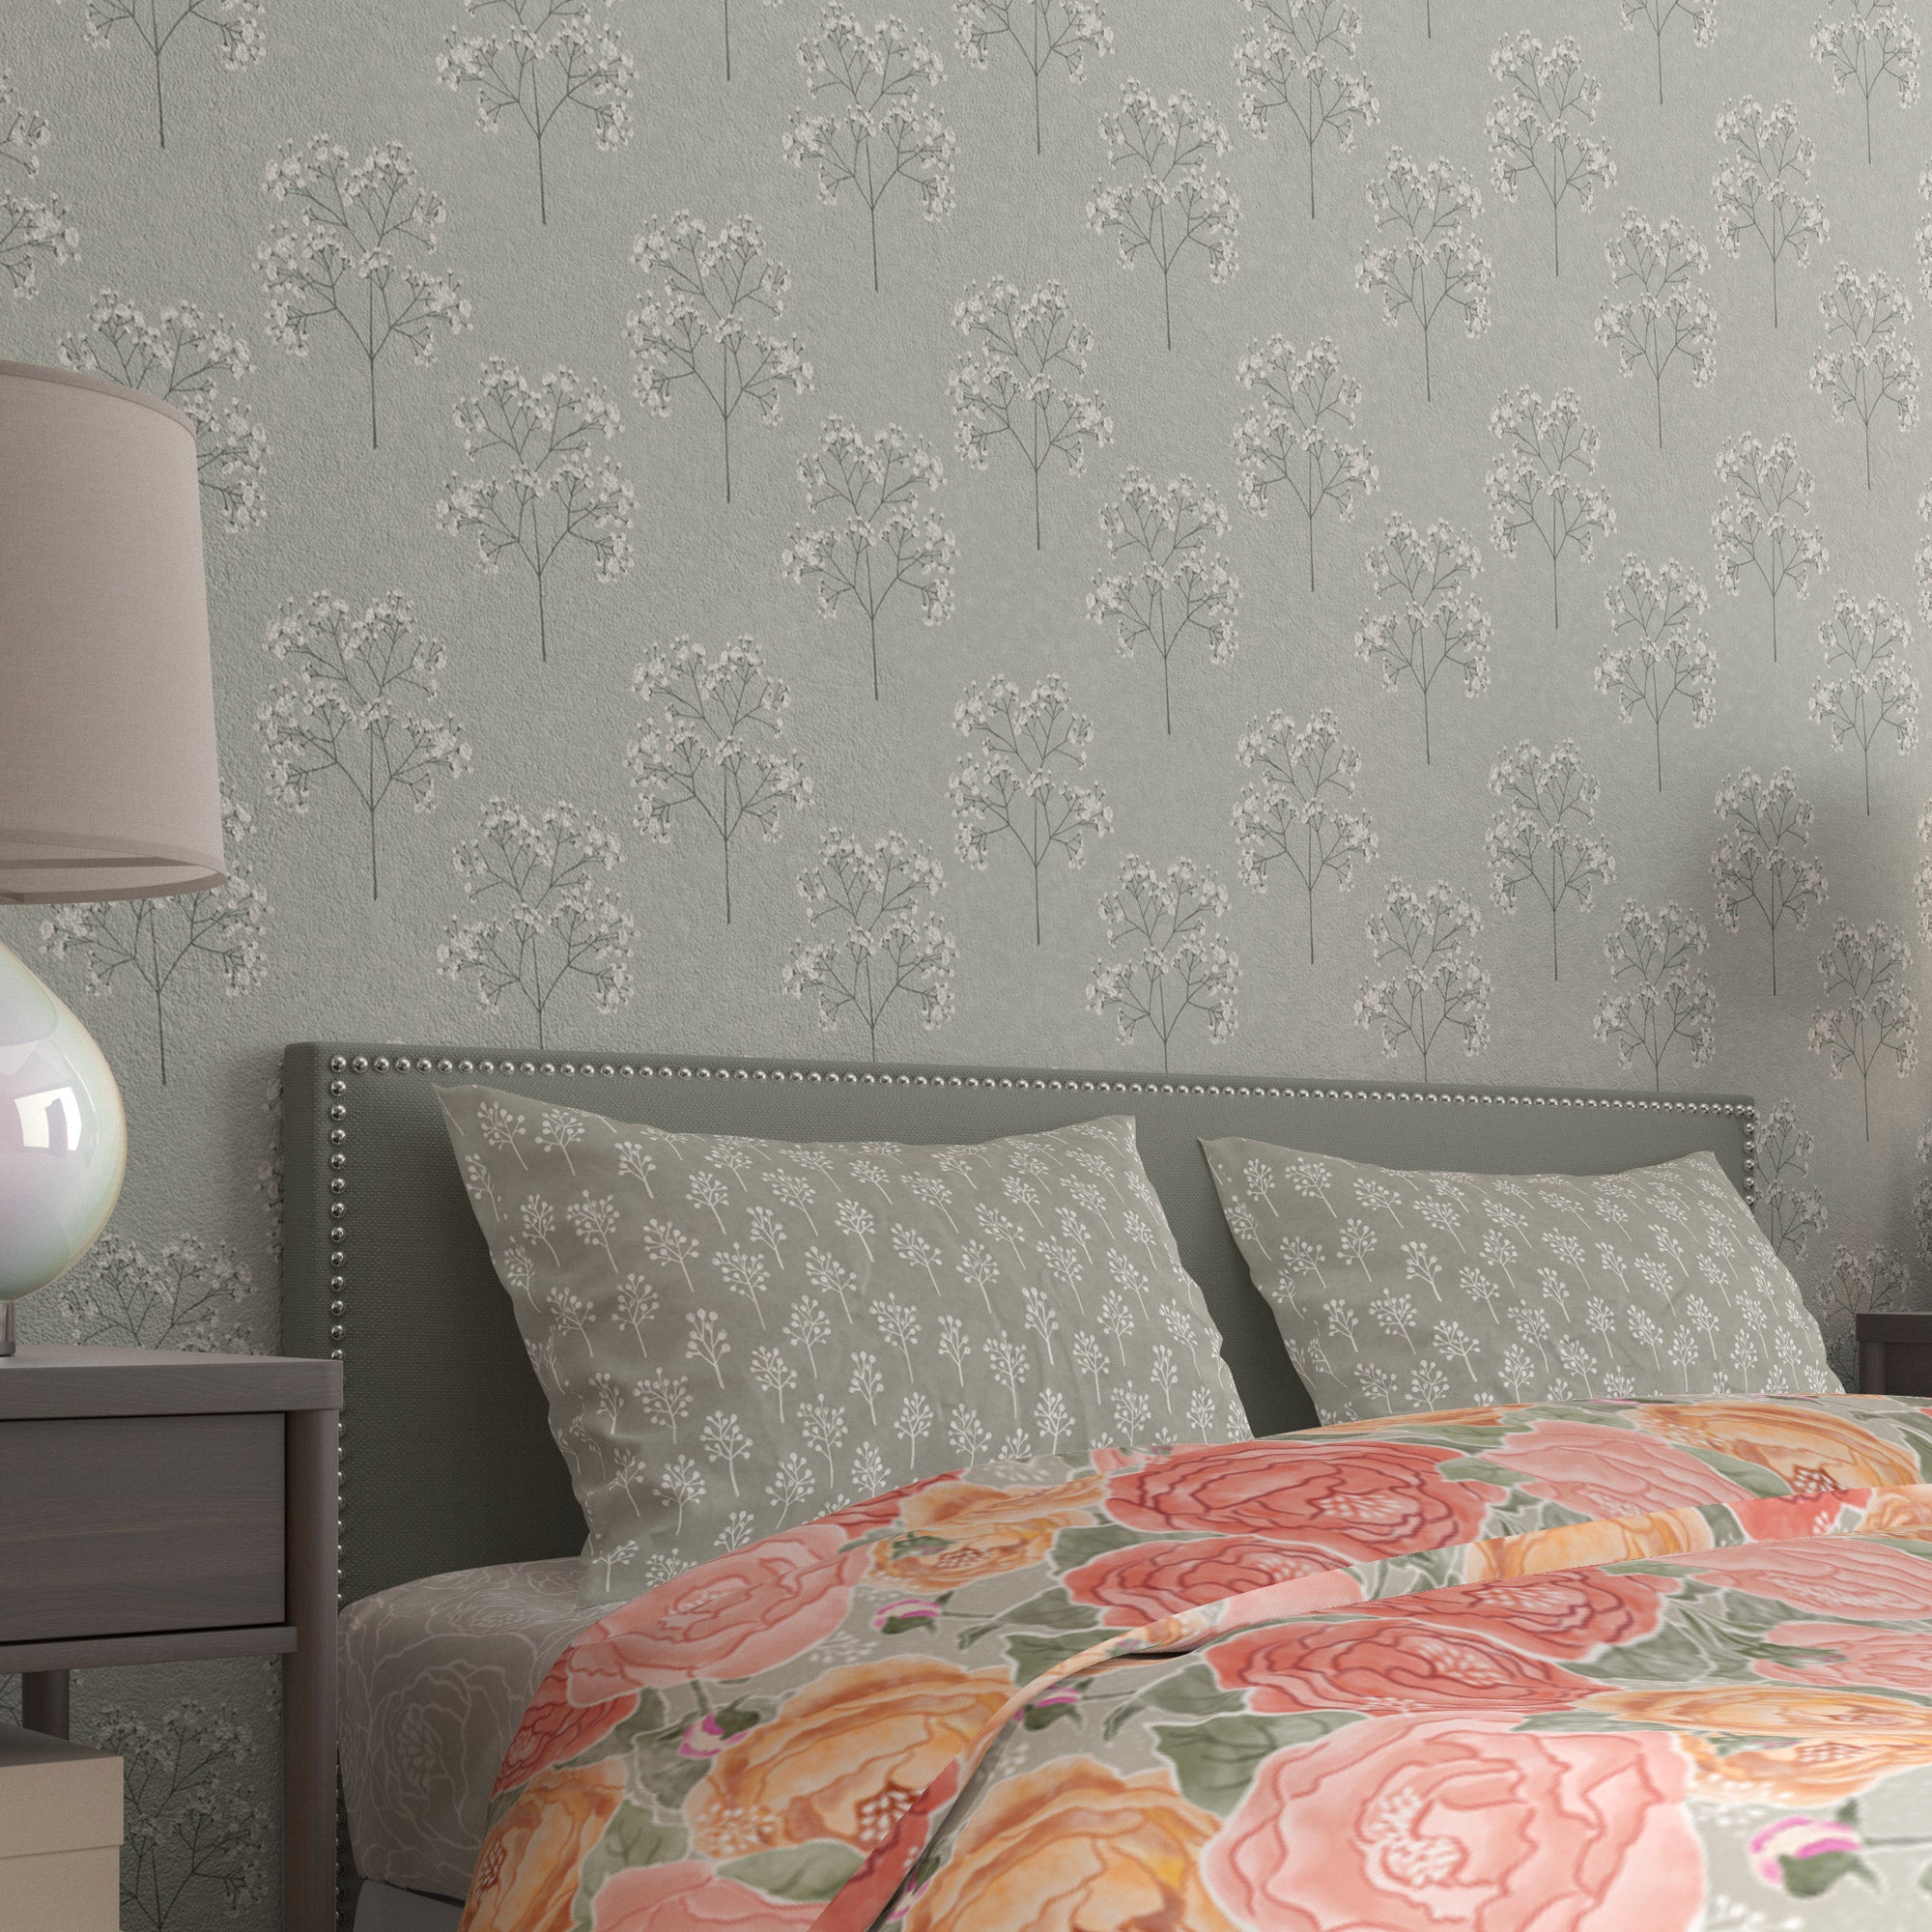 Large Baby's Breath Wallpaper comes in Peel & Stick or Prepasted